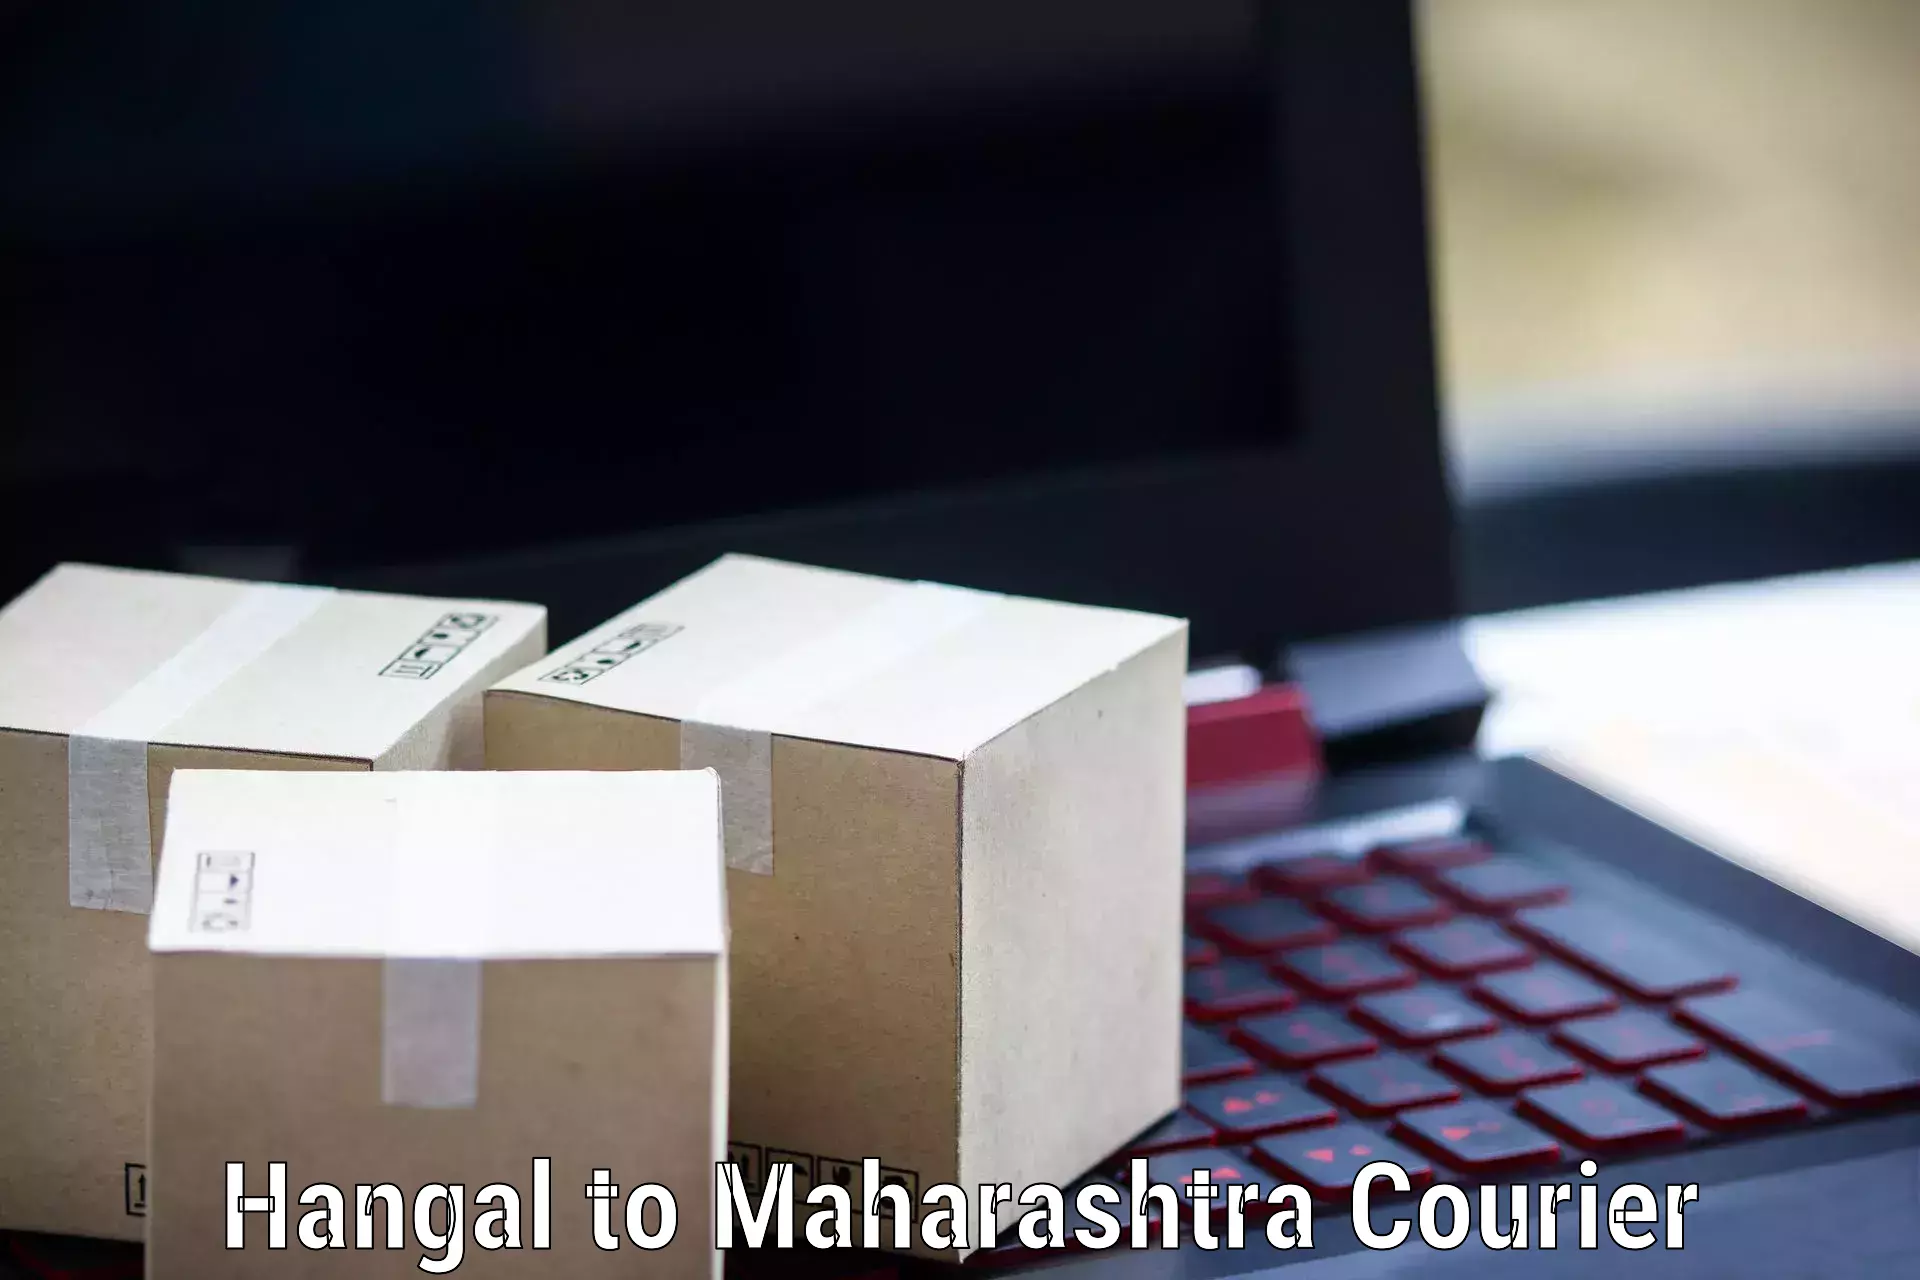 Express delivery capabilities Hangal to Baramati